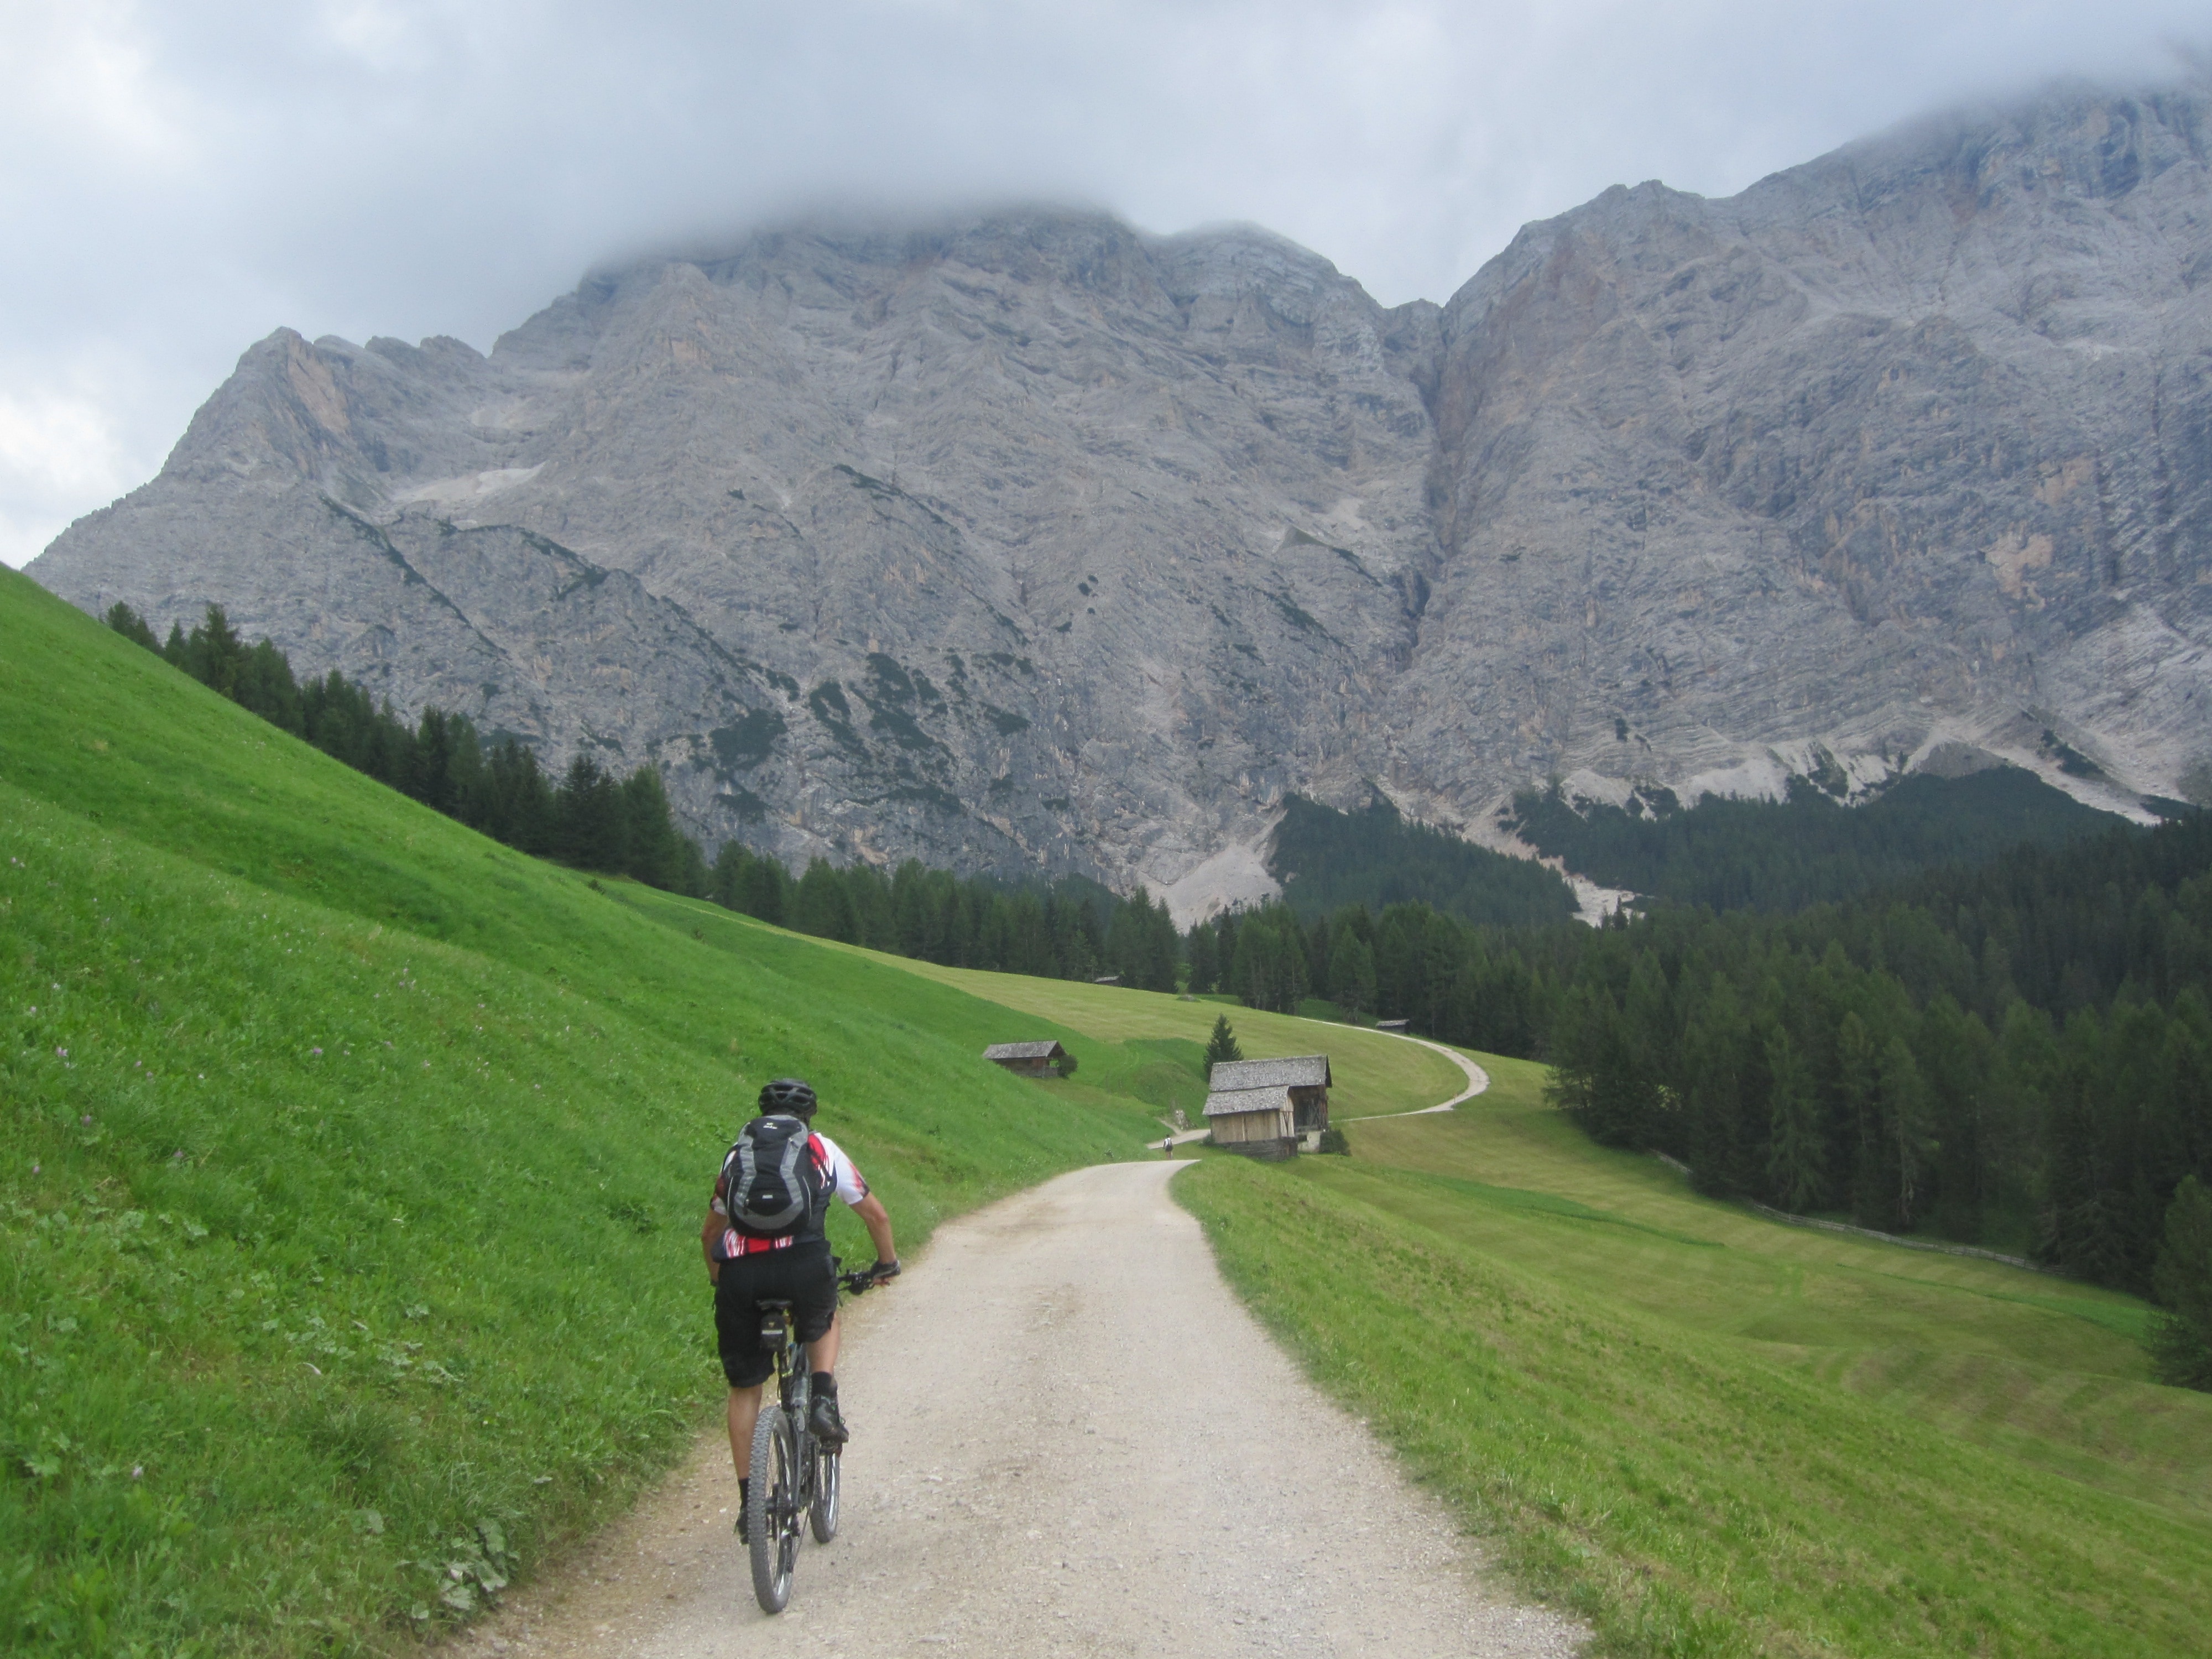 Dolomites, Mountains, Italy, Cyclists, mountain, cycling